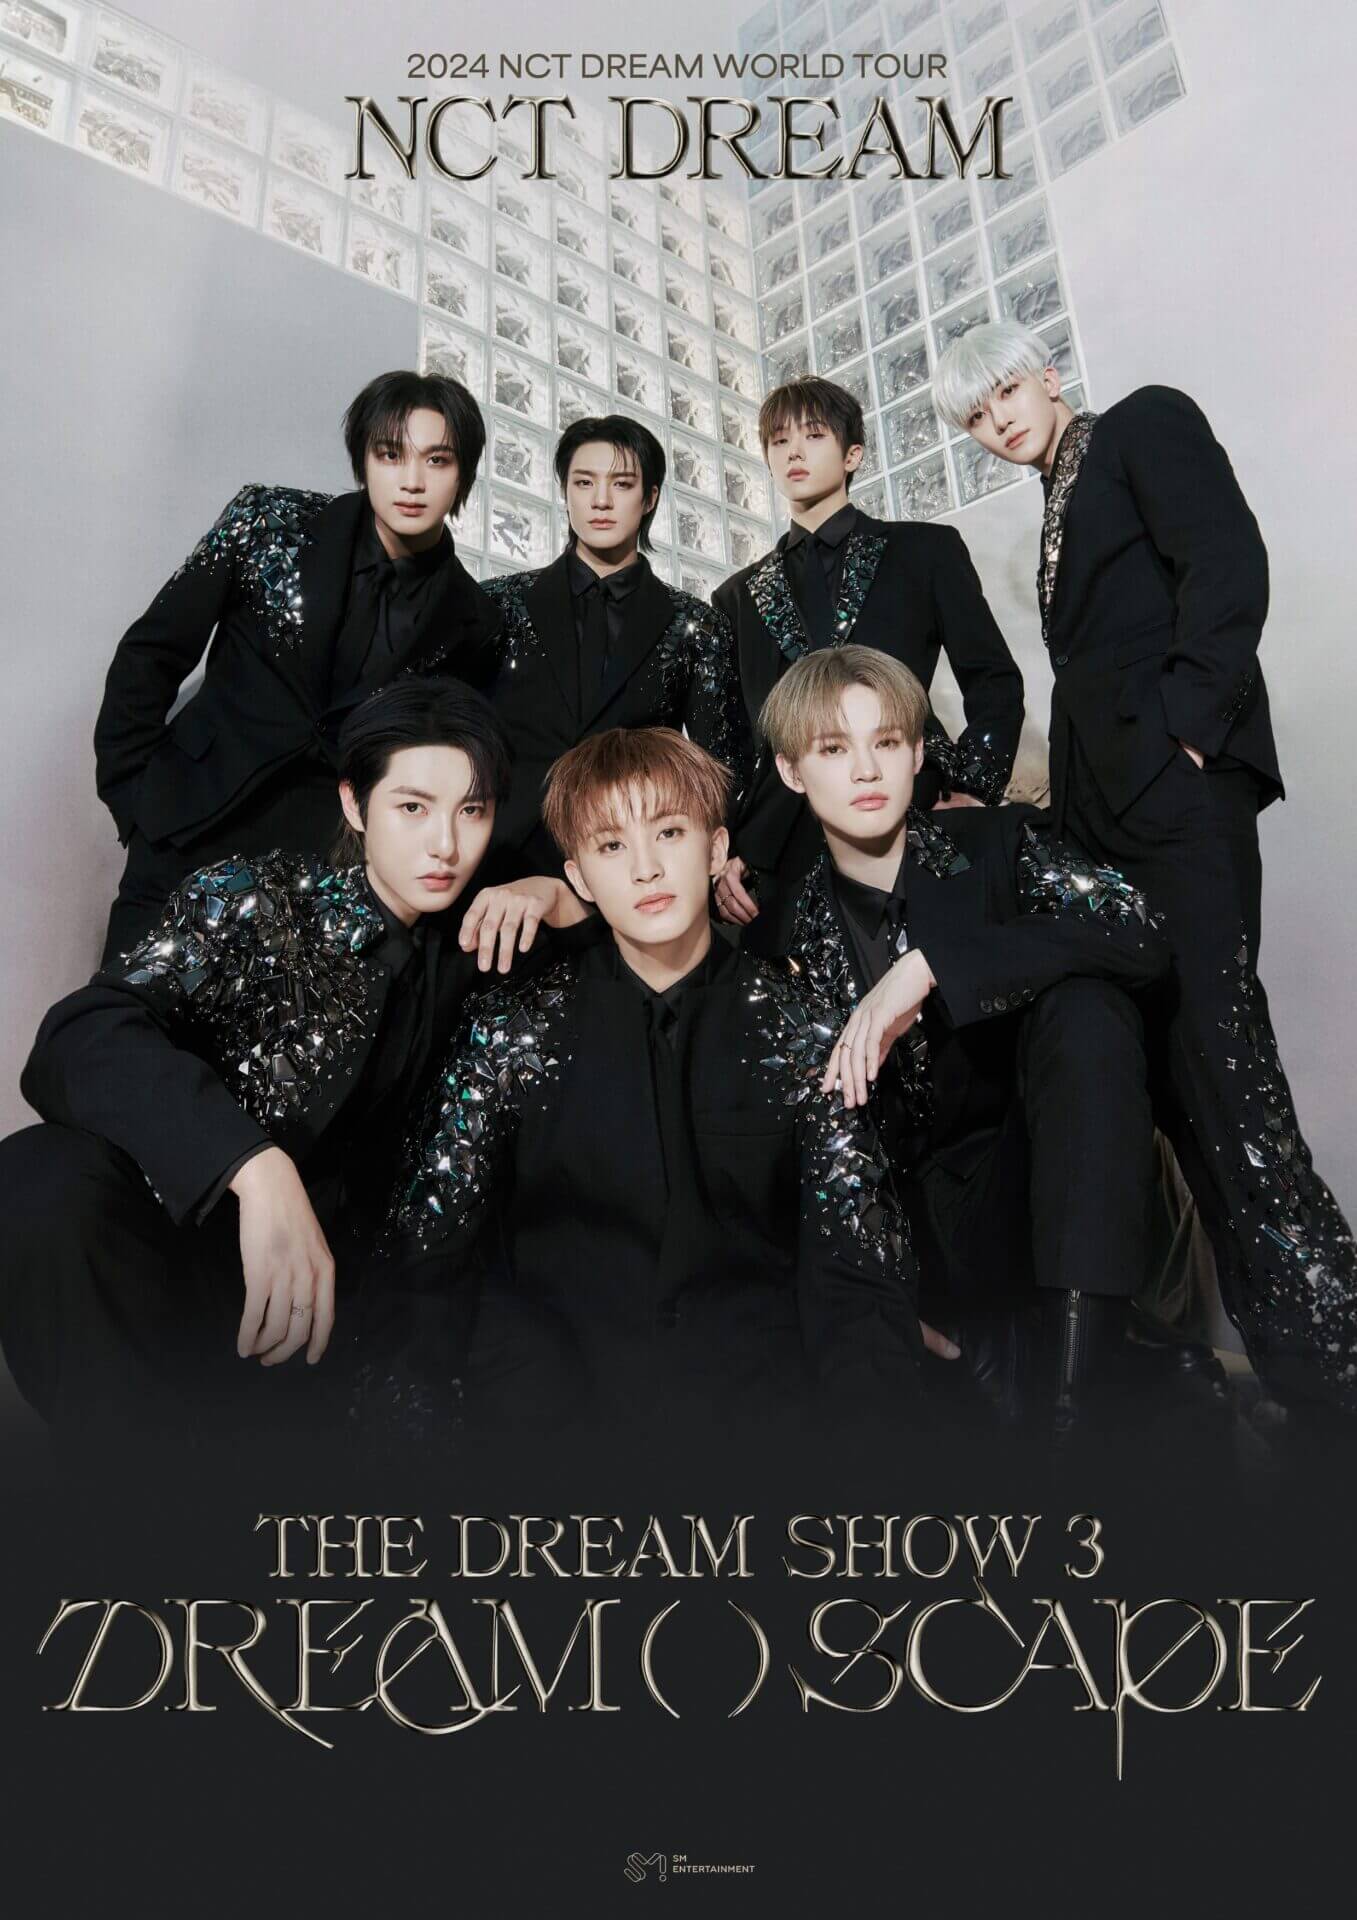 Official tour poster for "THE DREAM SHOW 3 : DREAM( )SCAPE" Tour which sees NCT Dream posing together in front of a white wall that has glass squares adorned high above, dressed in black.